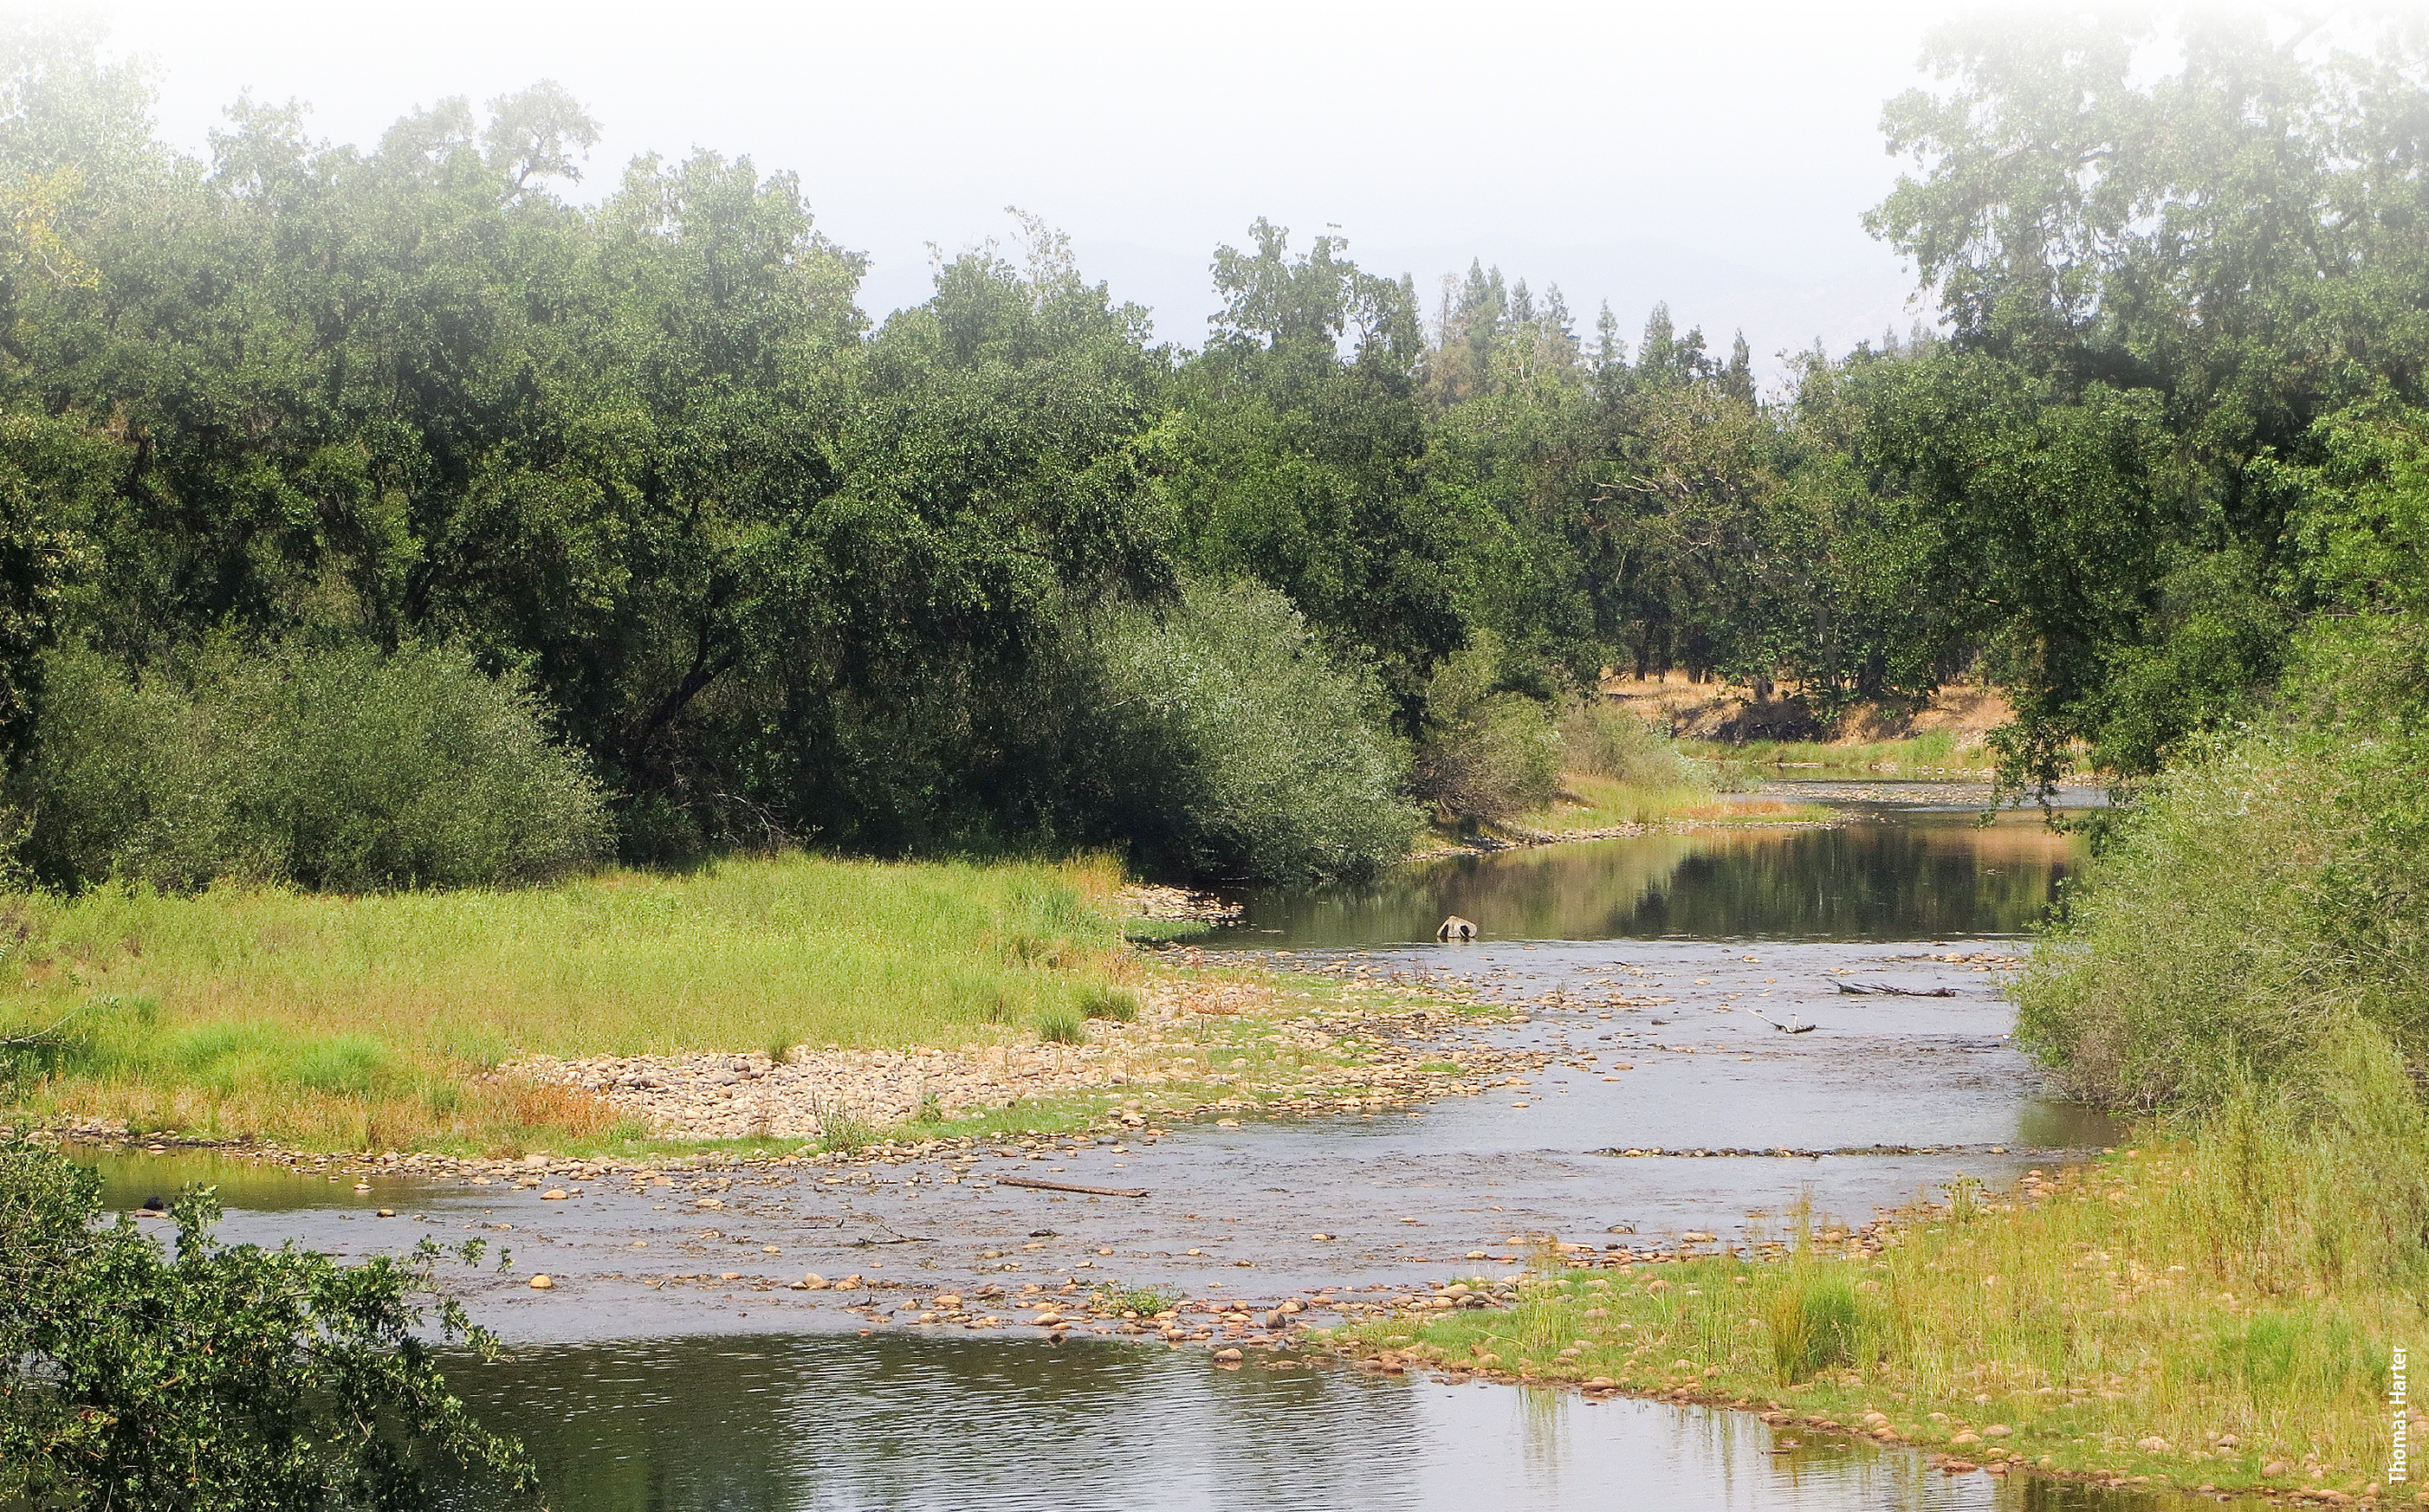 The Kings River flows across a coarse gravel bed near the Sierra Nevada foothills, recharging groundwater.